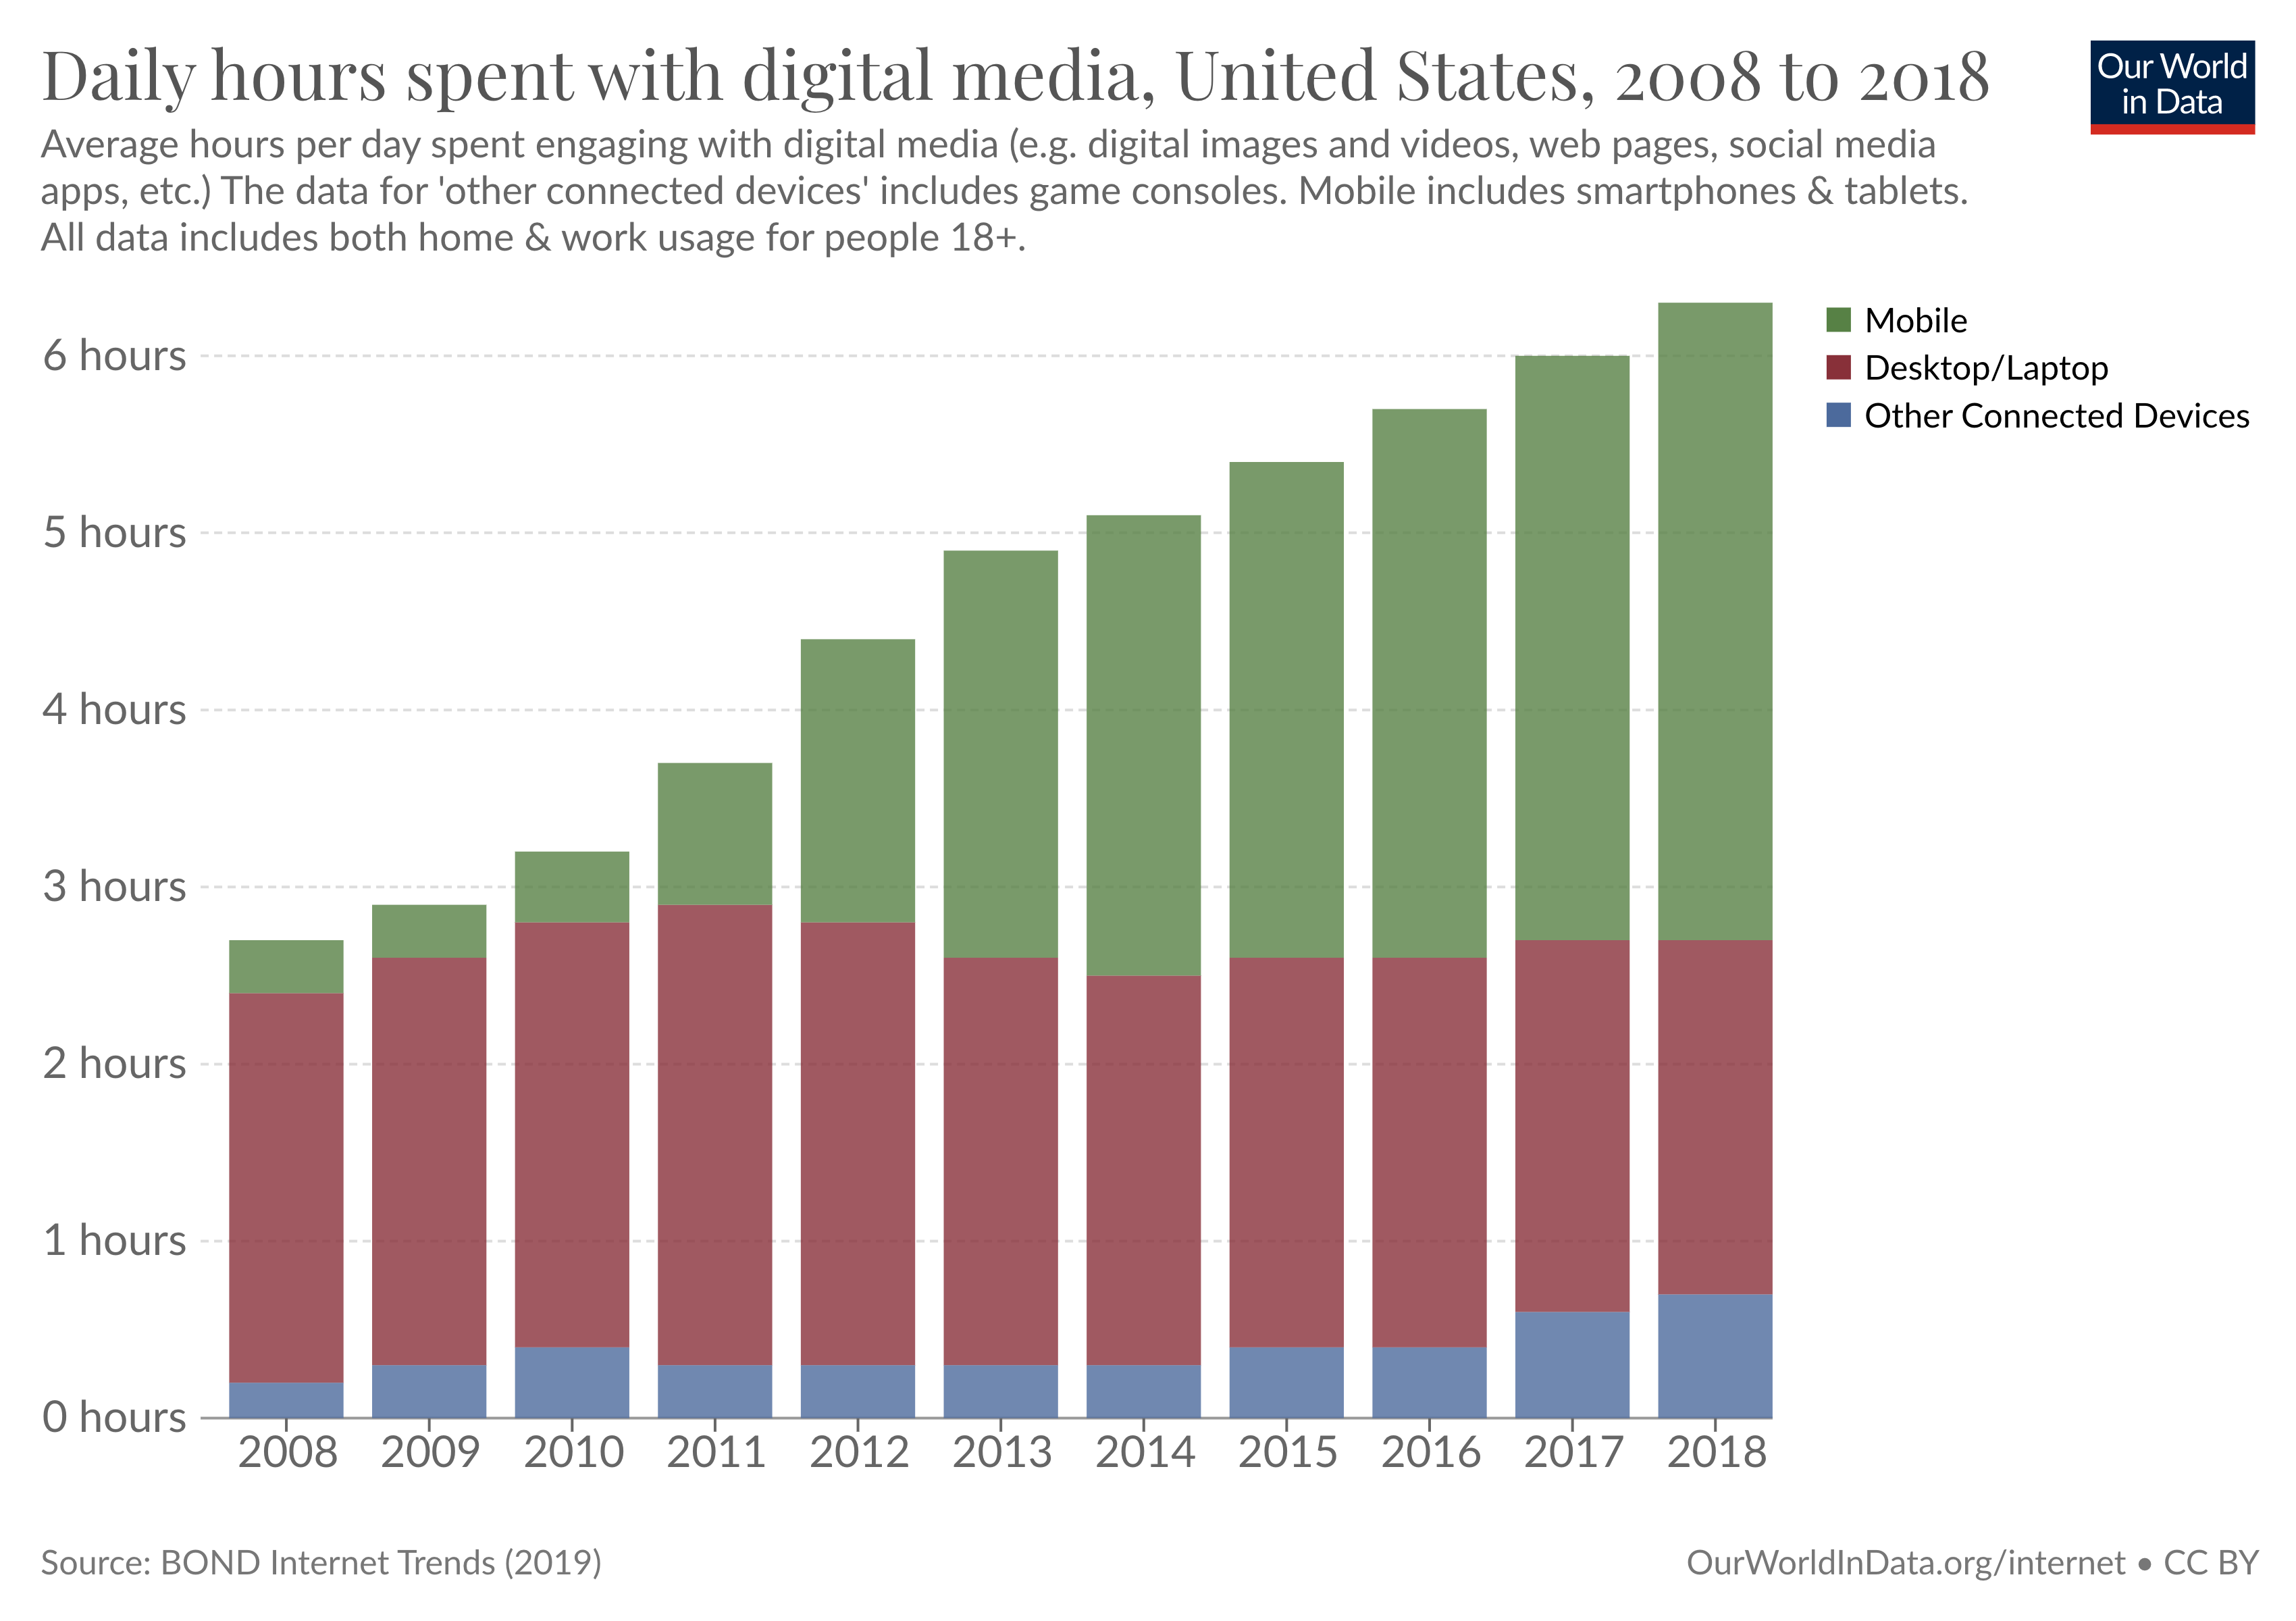 Stacked bar chart of the amount of time spent on digital media in the US over time, showing a doubling in the decade from 2008 to 2018.